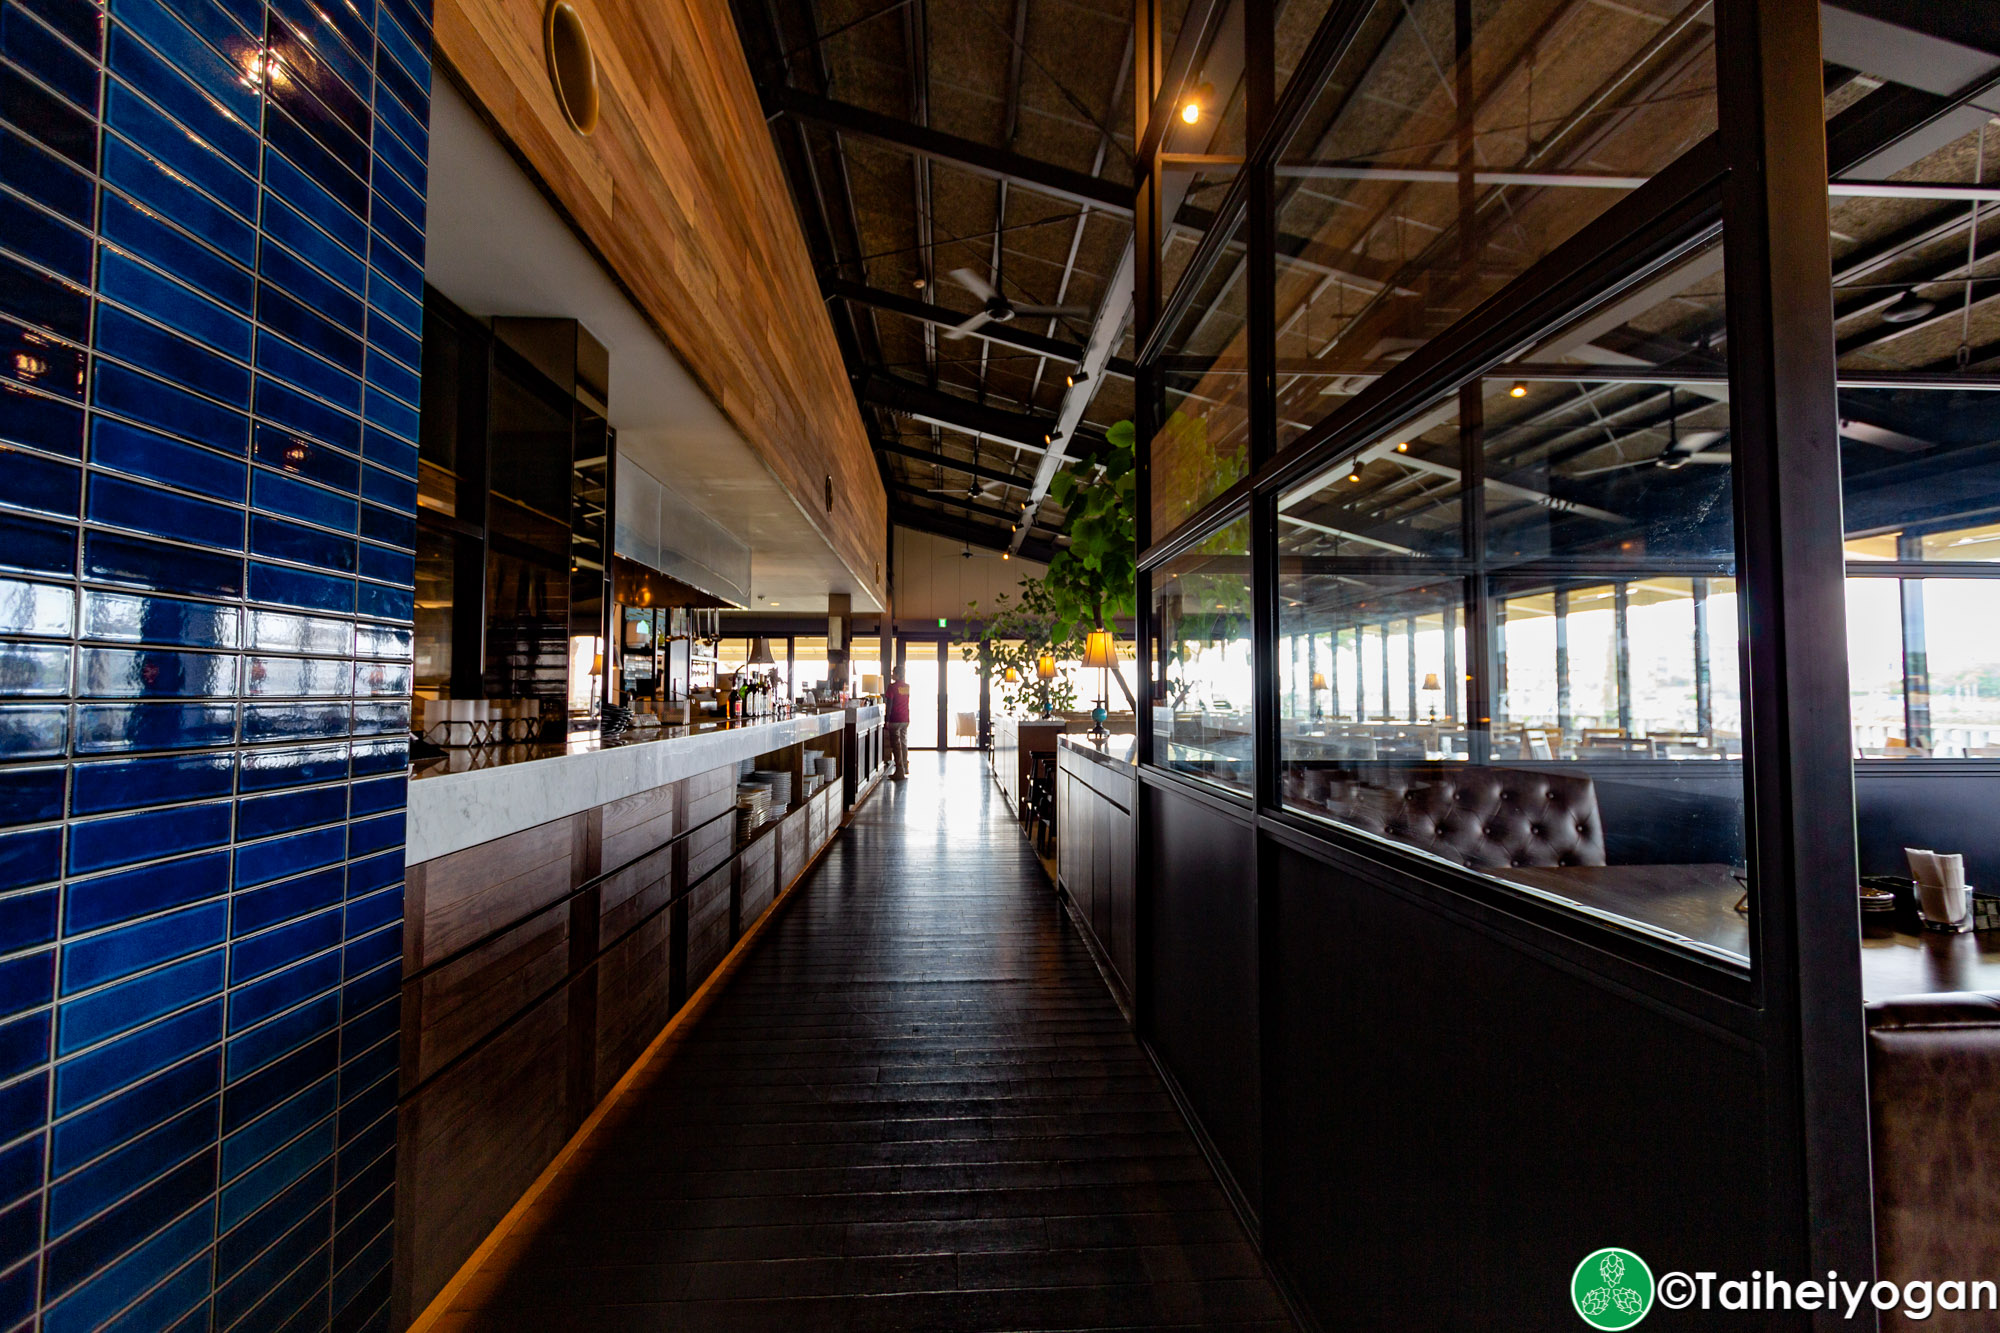 Chatan Harbor Brewery - Interior - Restaurant Section